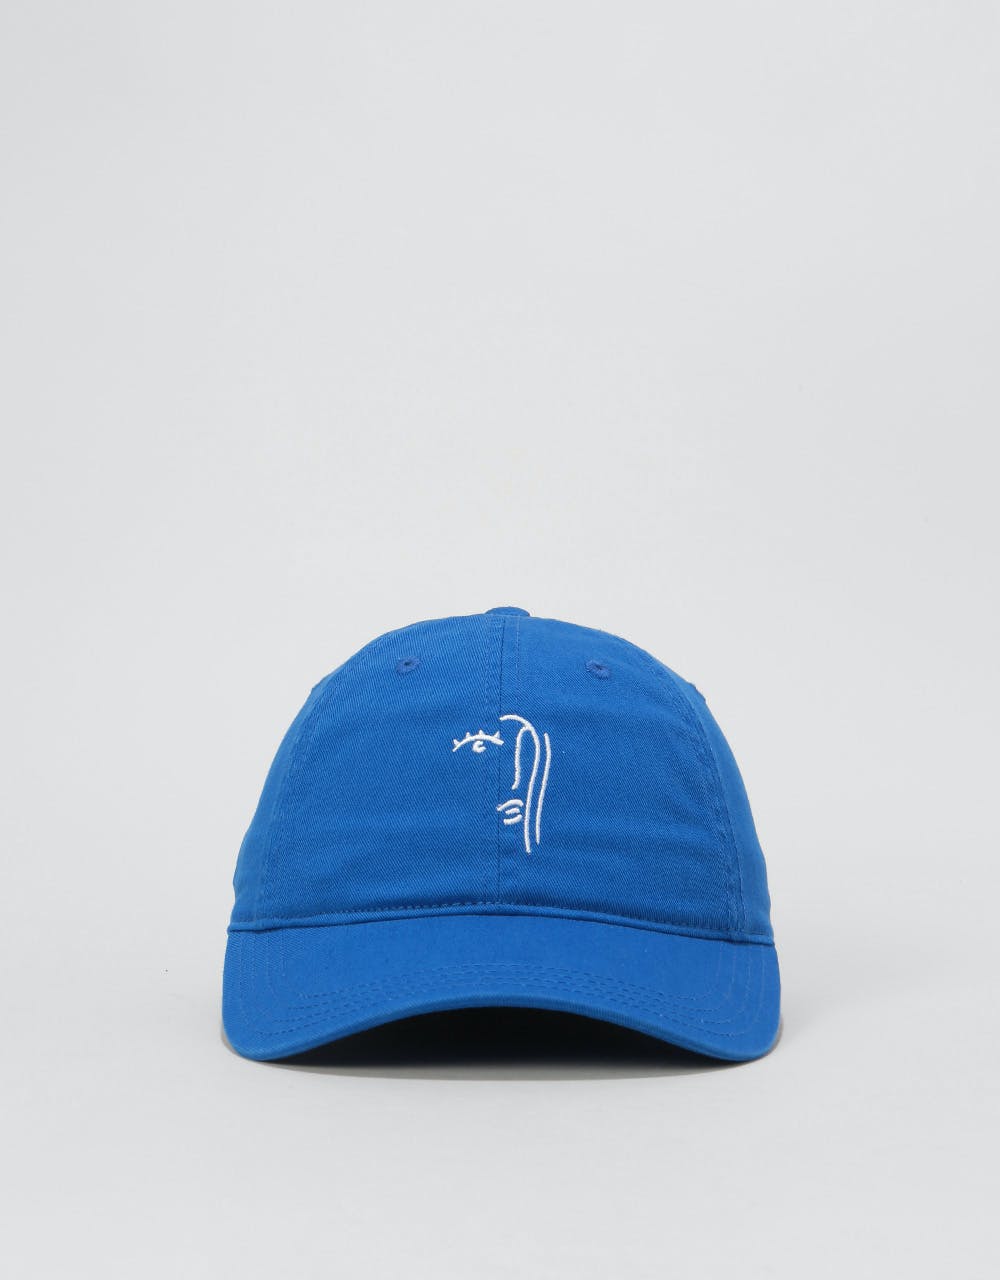 Route One Abstract Cap - Royal Blue